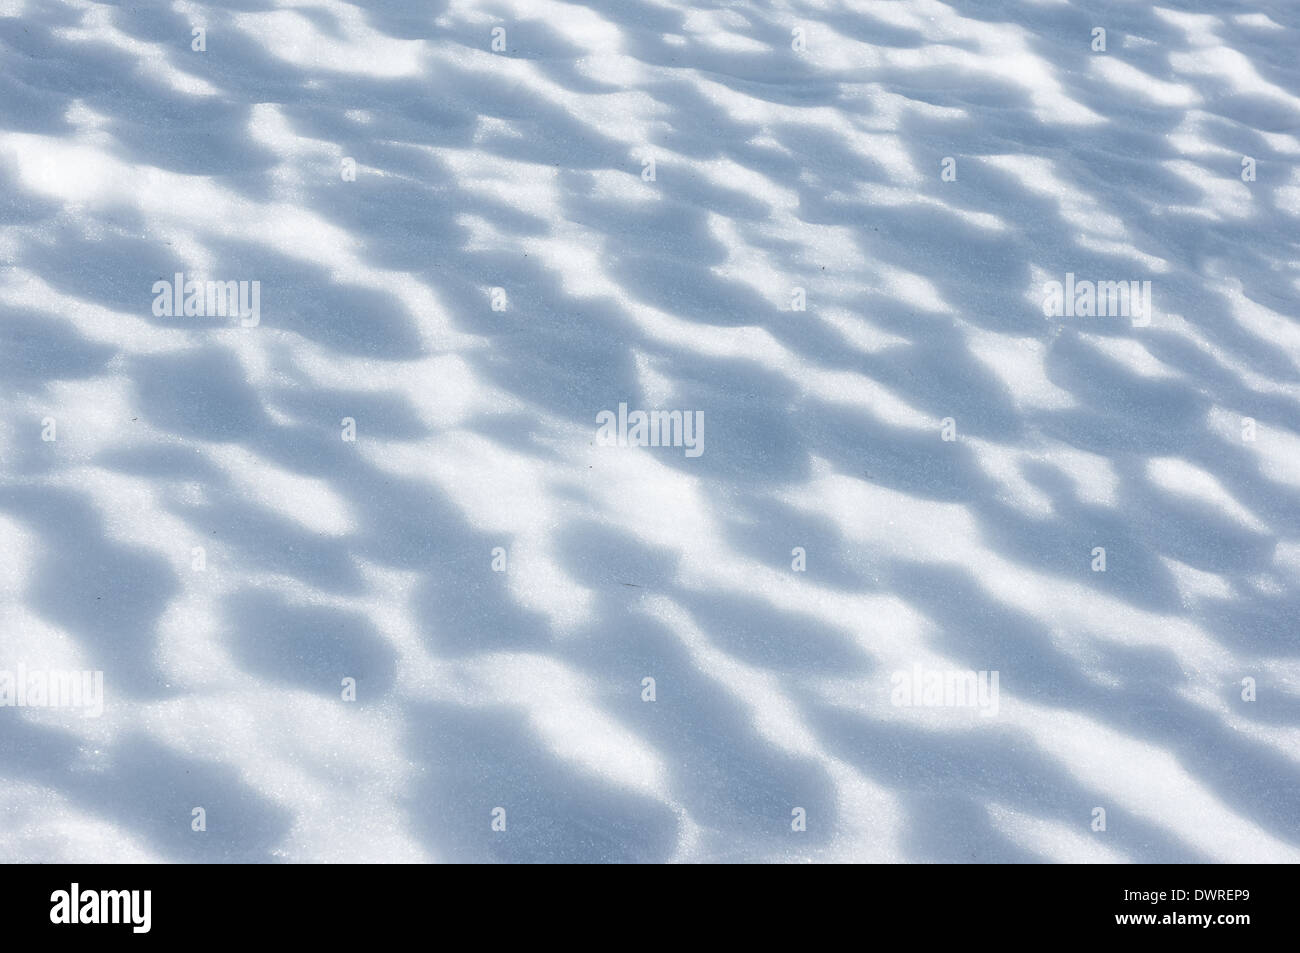 winter abstract landscape with snow textures Stock Photo